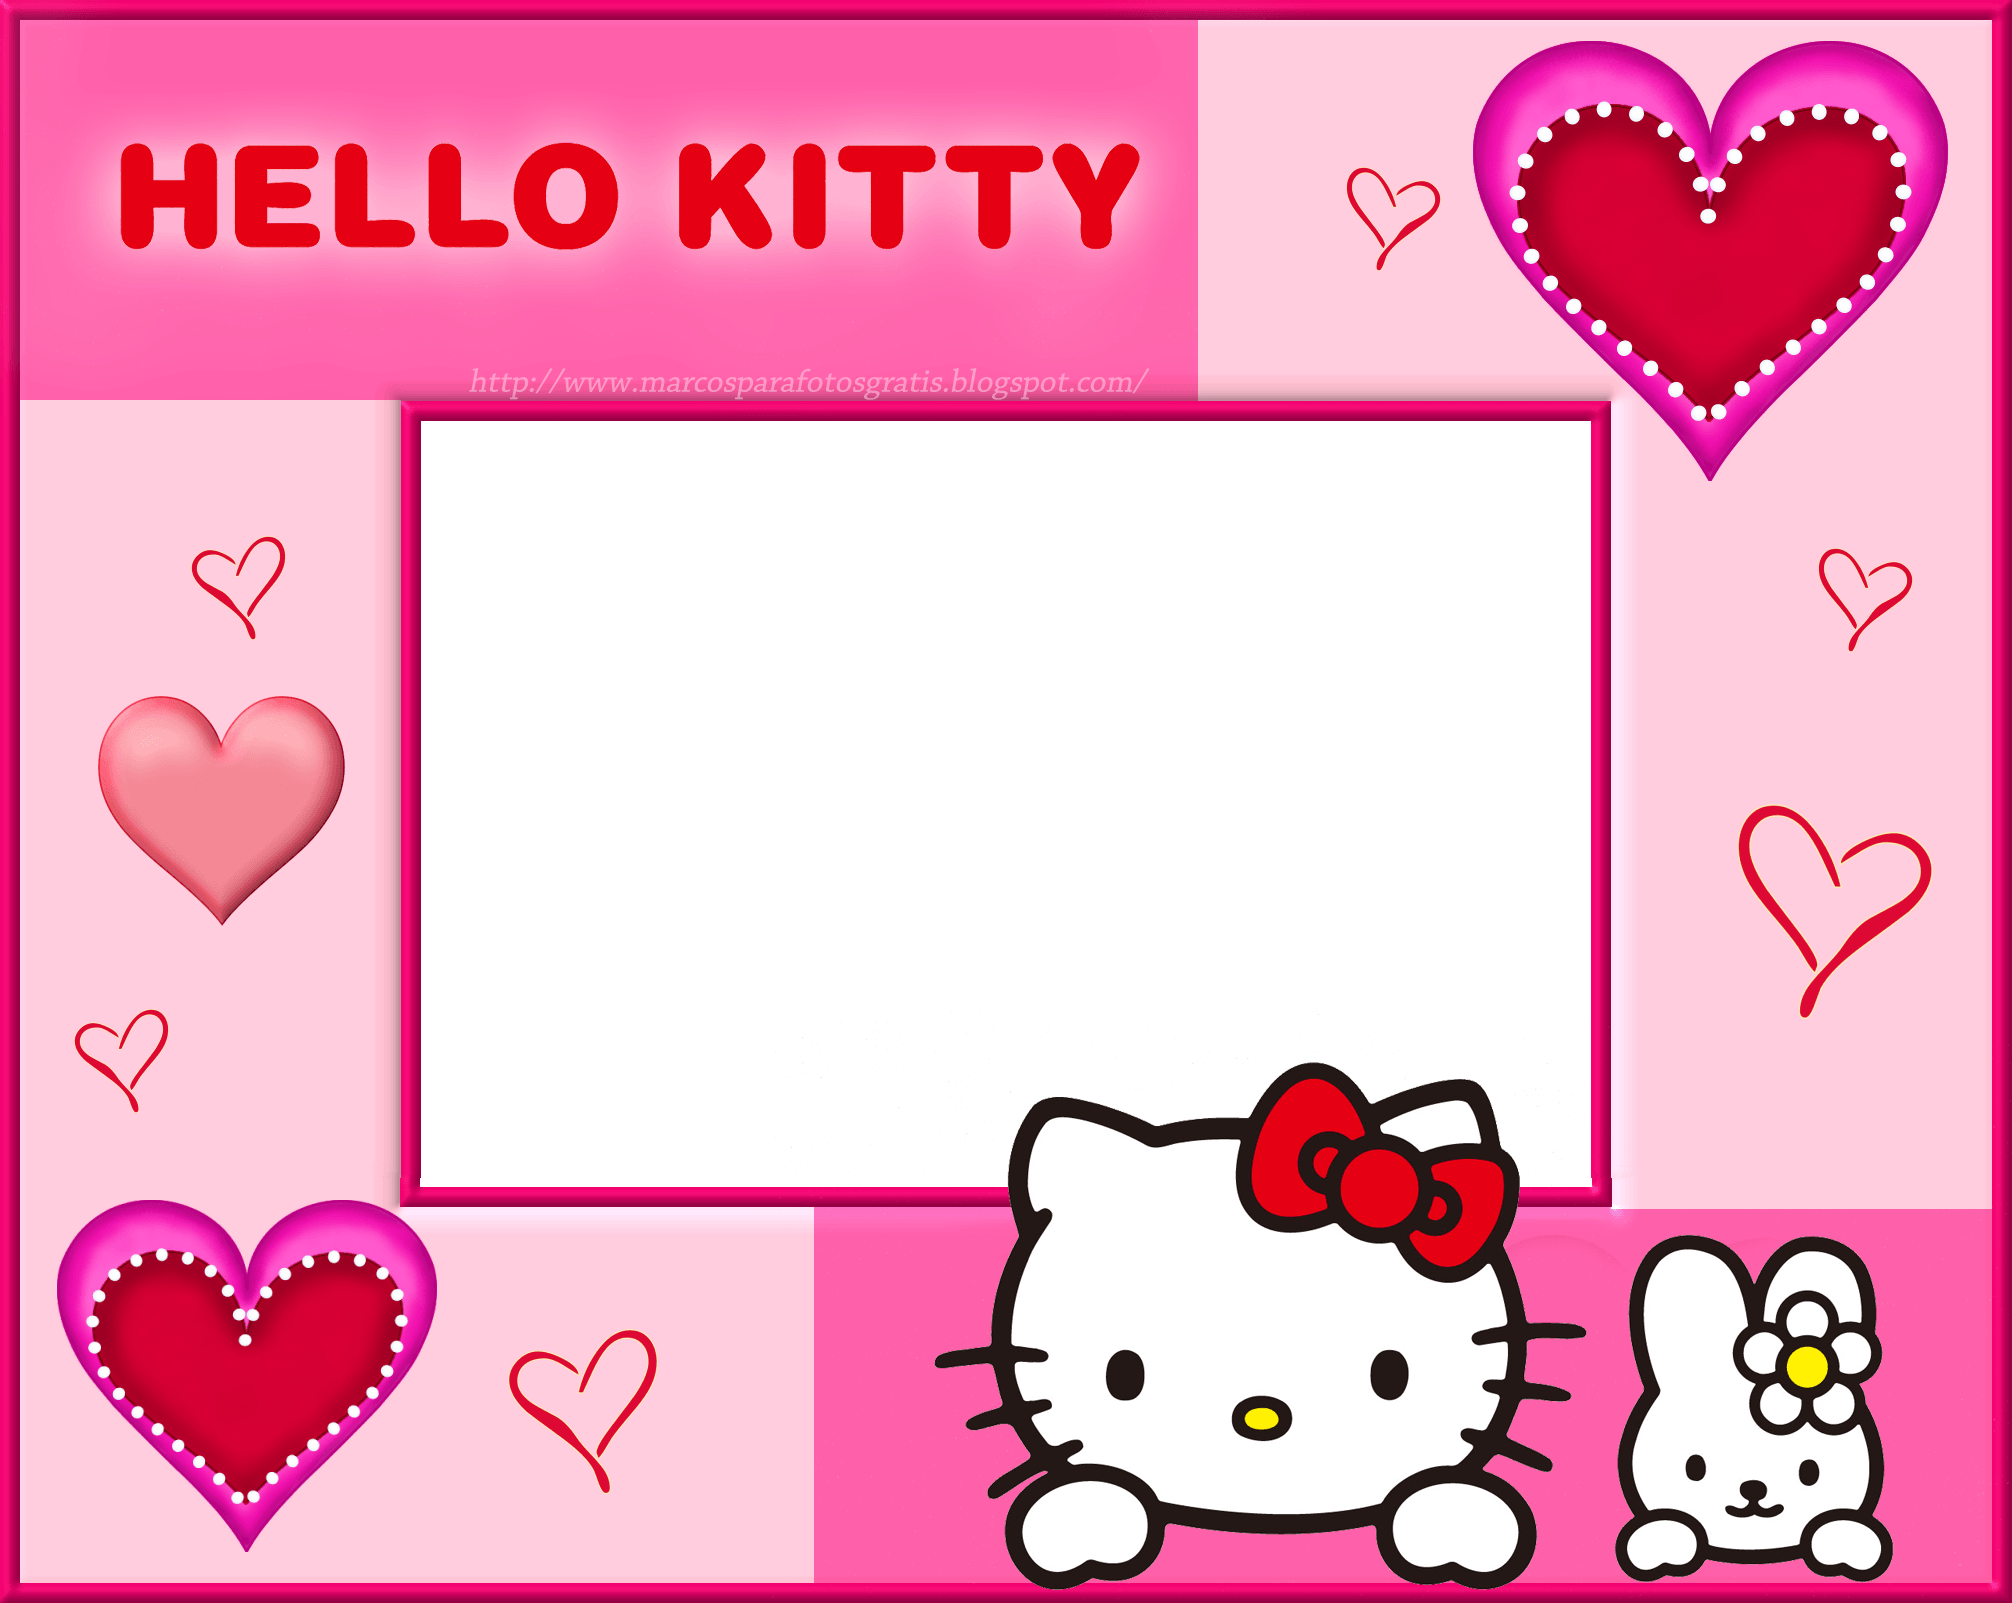 hello kitty background HD. Background Check All